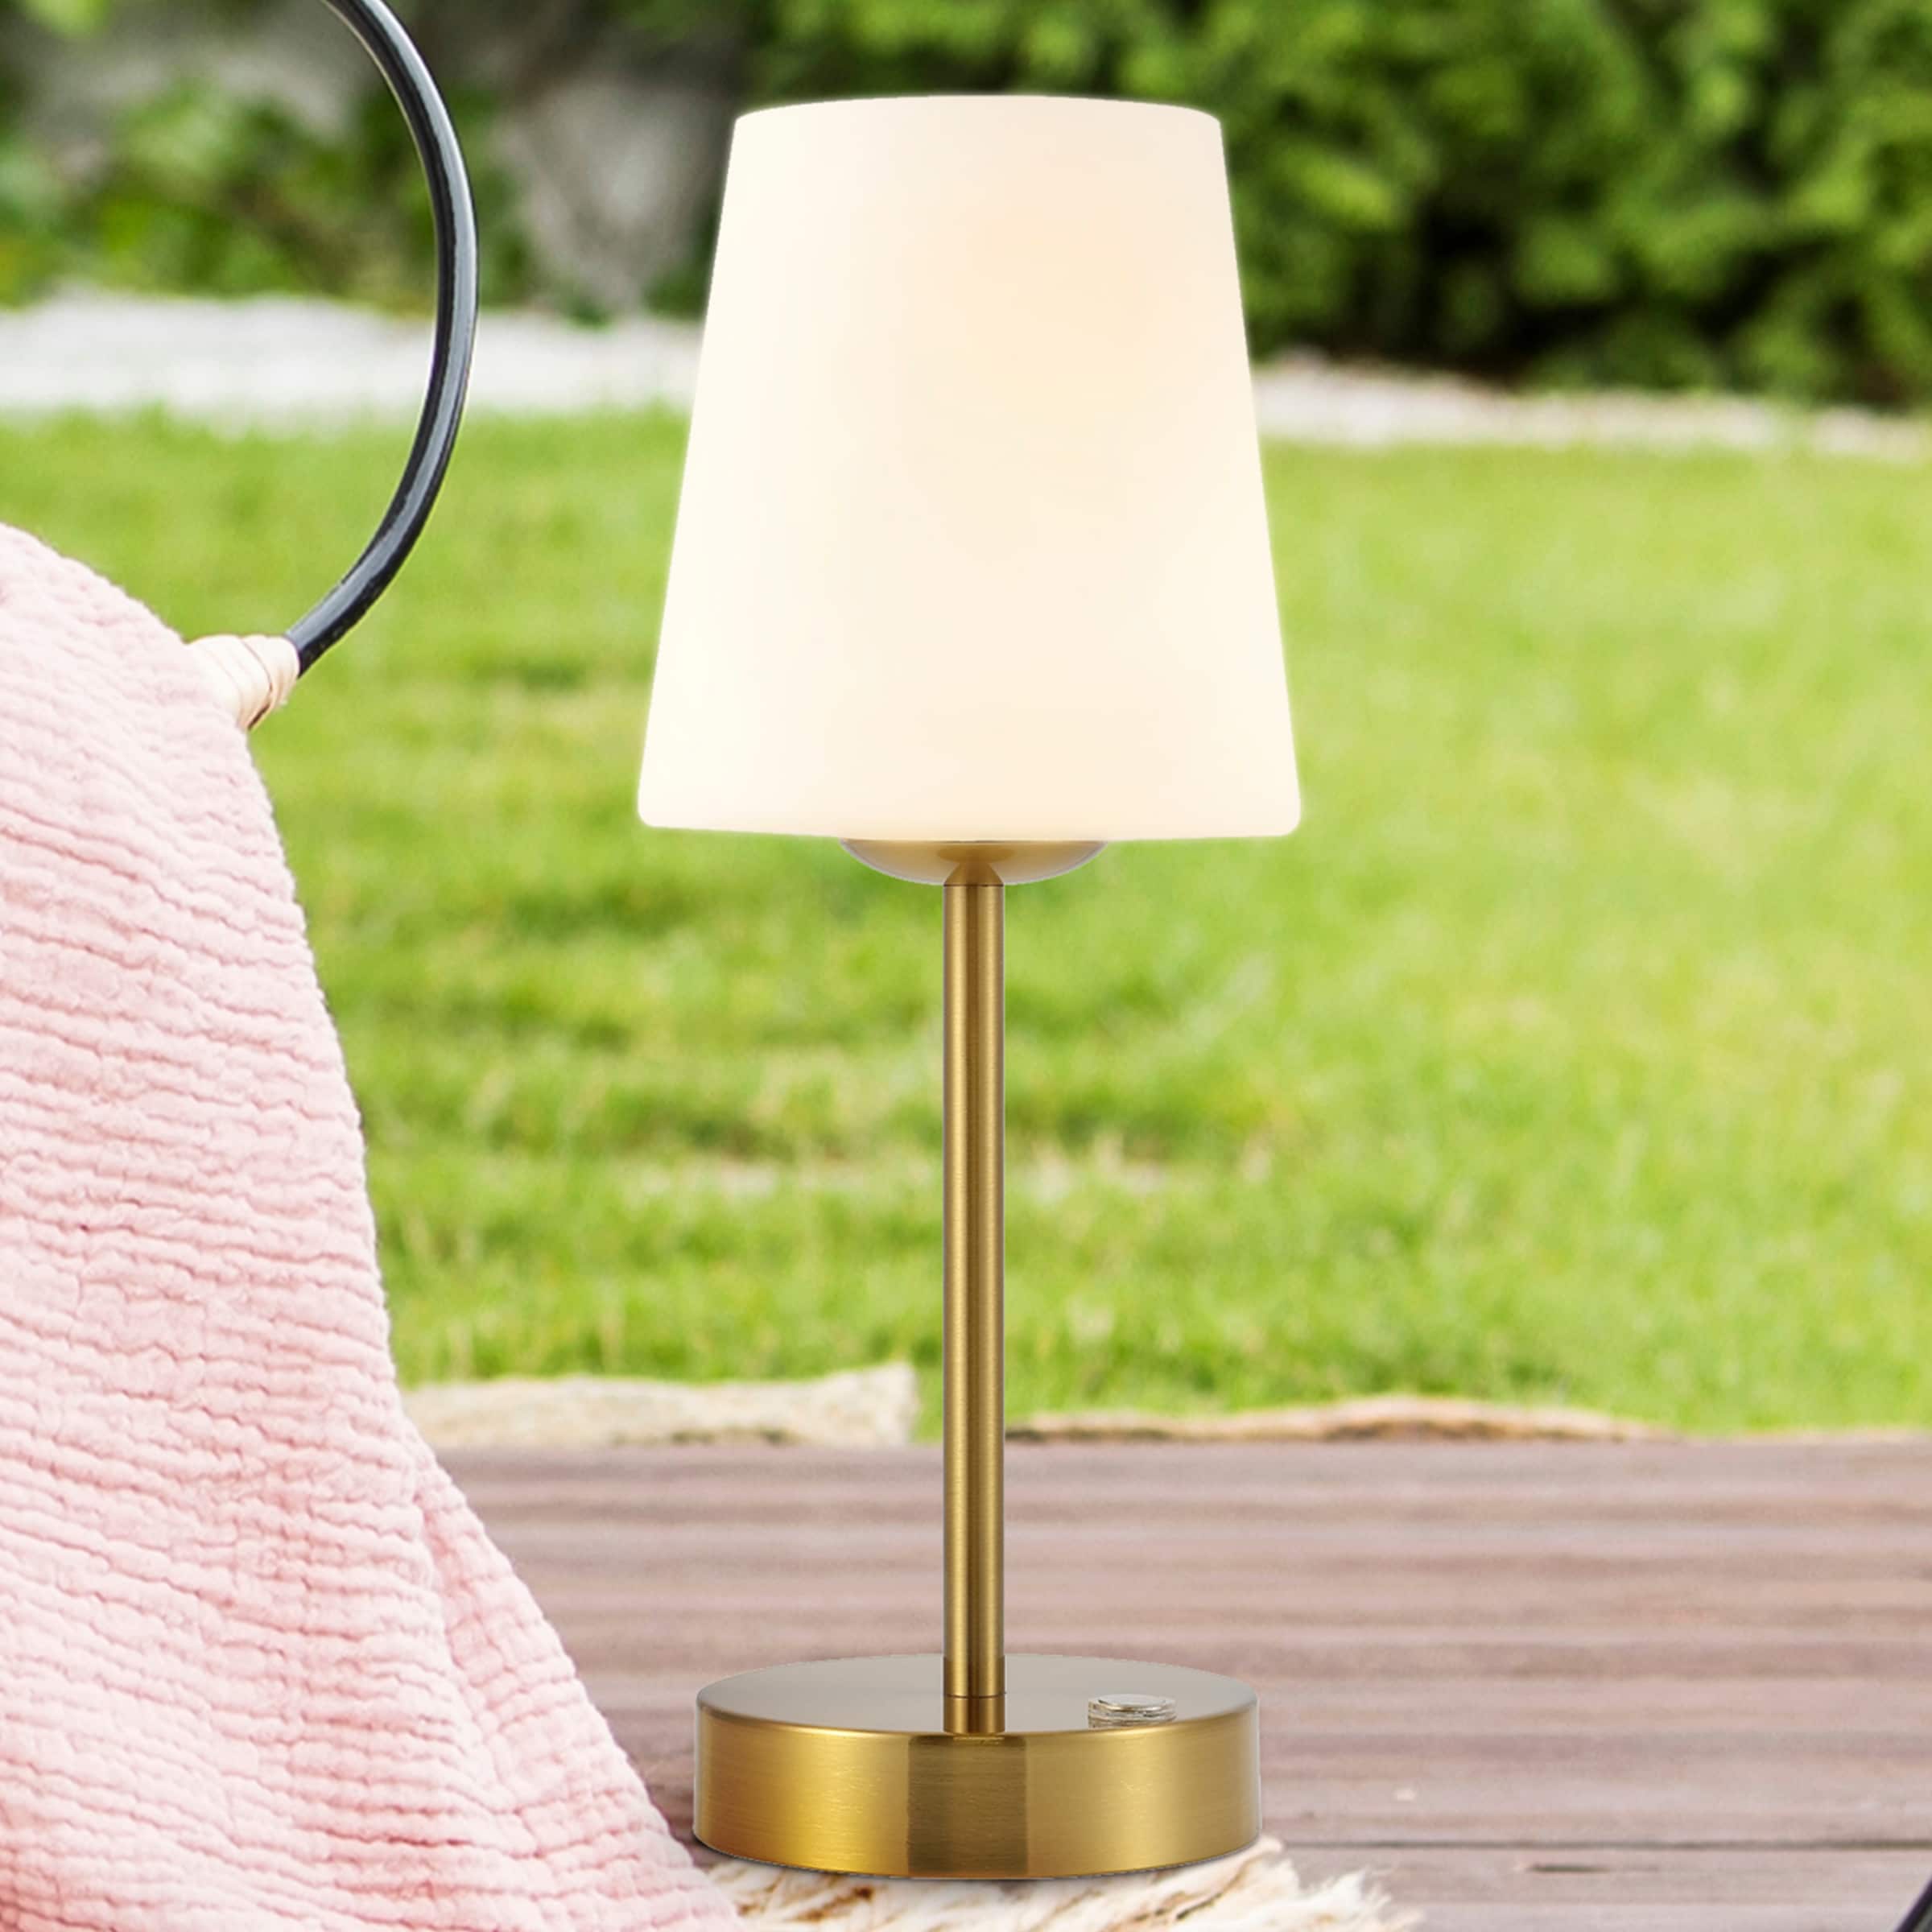 Champalimaud Fondant Small Table Lamp in Ivory and Soft Brass with Lin